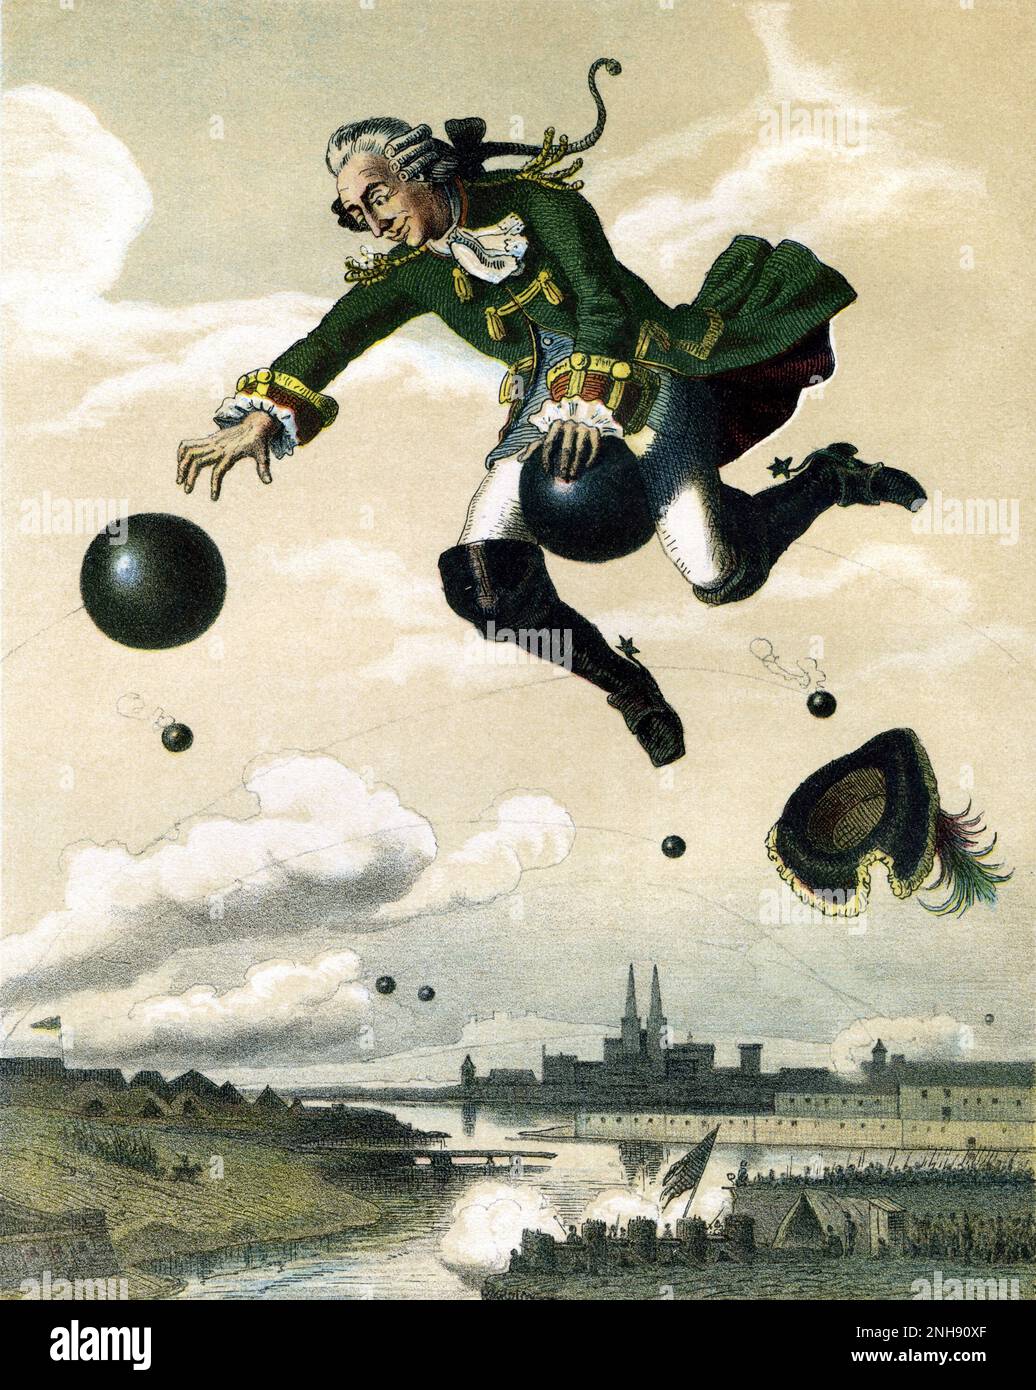 Baron Meonchhausen's flight on a cannonball, 1872. Baron Munchausen is a fictional German nobleman created by the German writer Rudolf Erich Raspe in 1785. The character is loosely based on a real baron, Hieronymus Karl Friedrich, Freiherr von Meonchhausen, who told outrageous tall tales based on his military career. The condition of Munchausen syndrome derives its name from the fictional character. Stock Photo